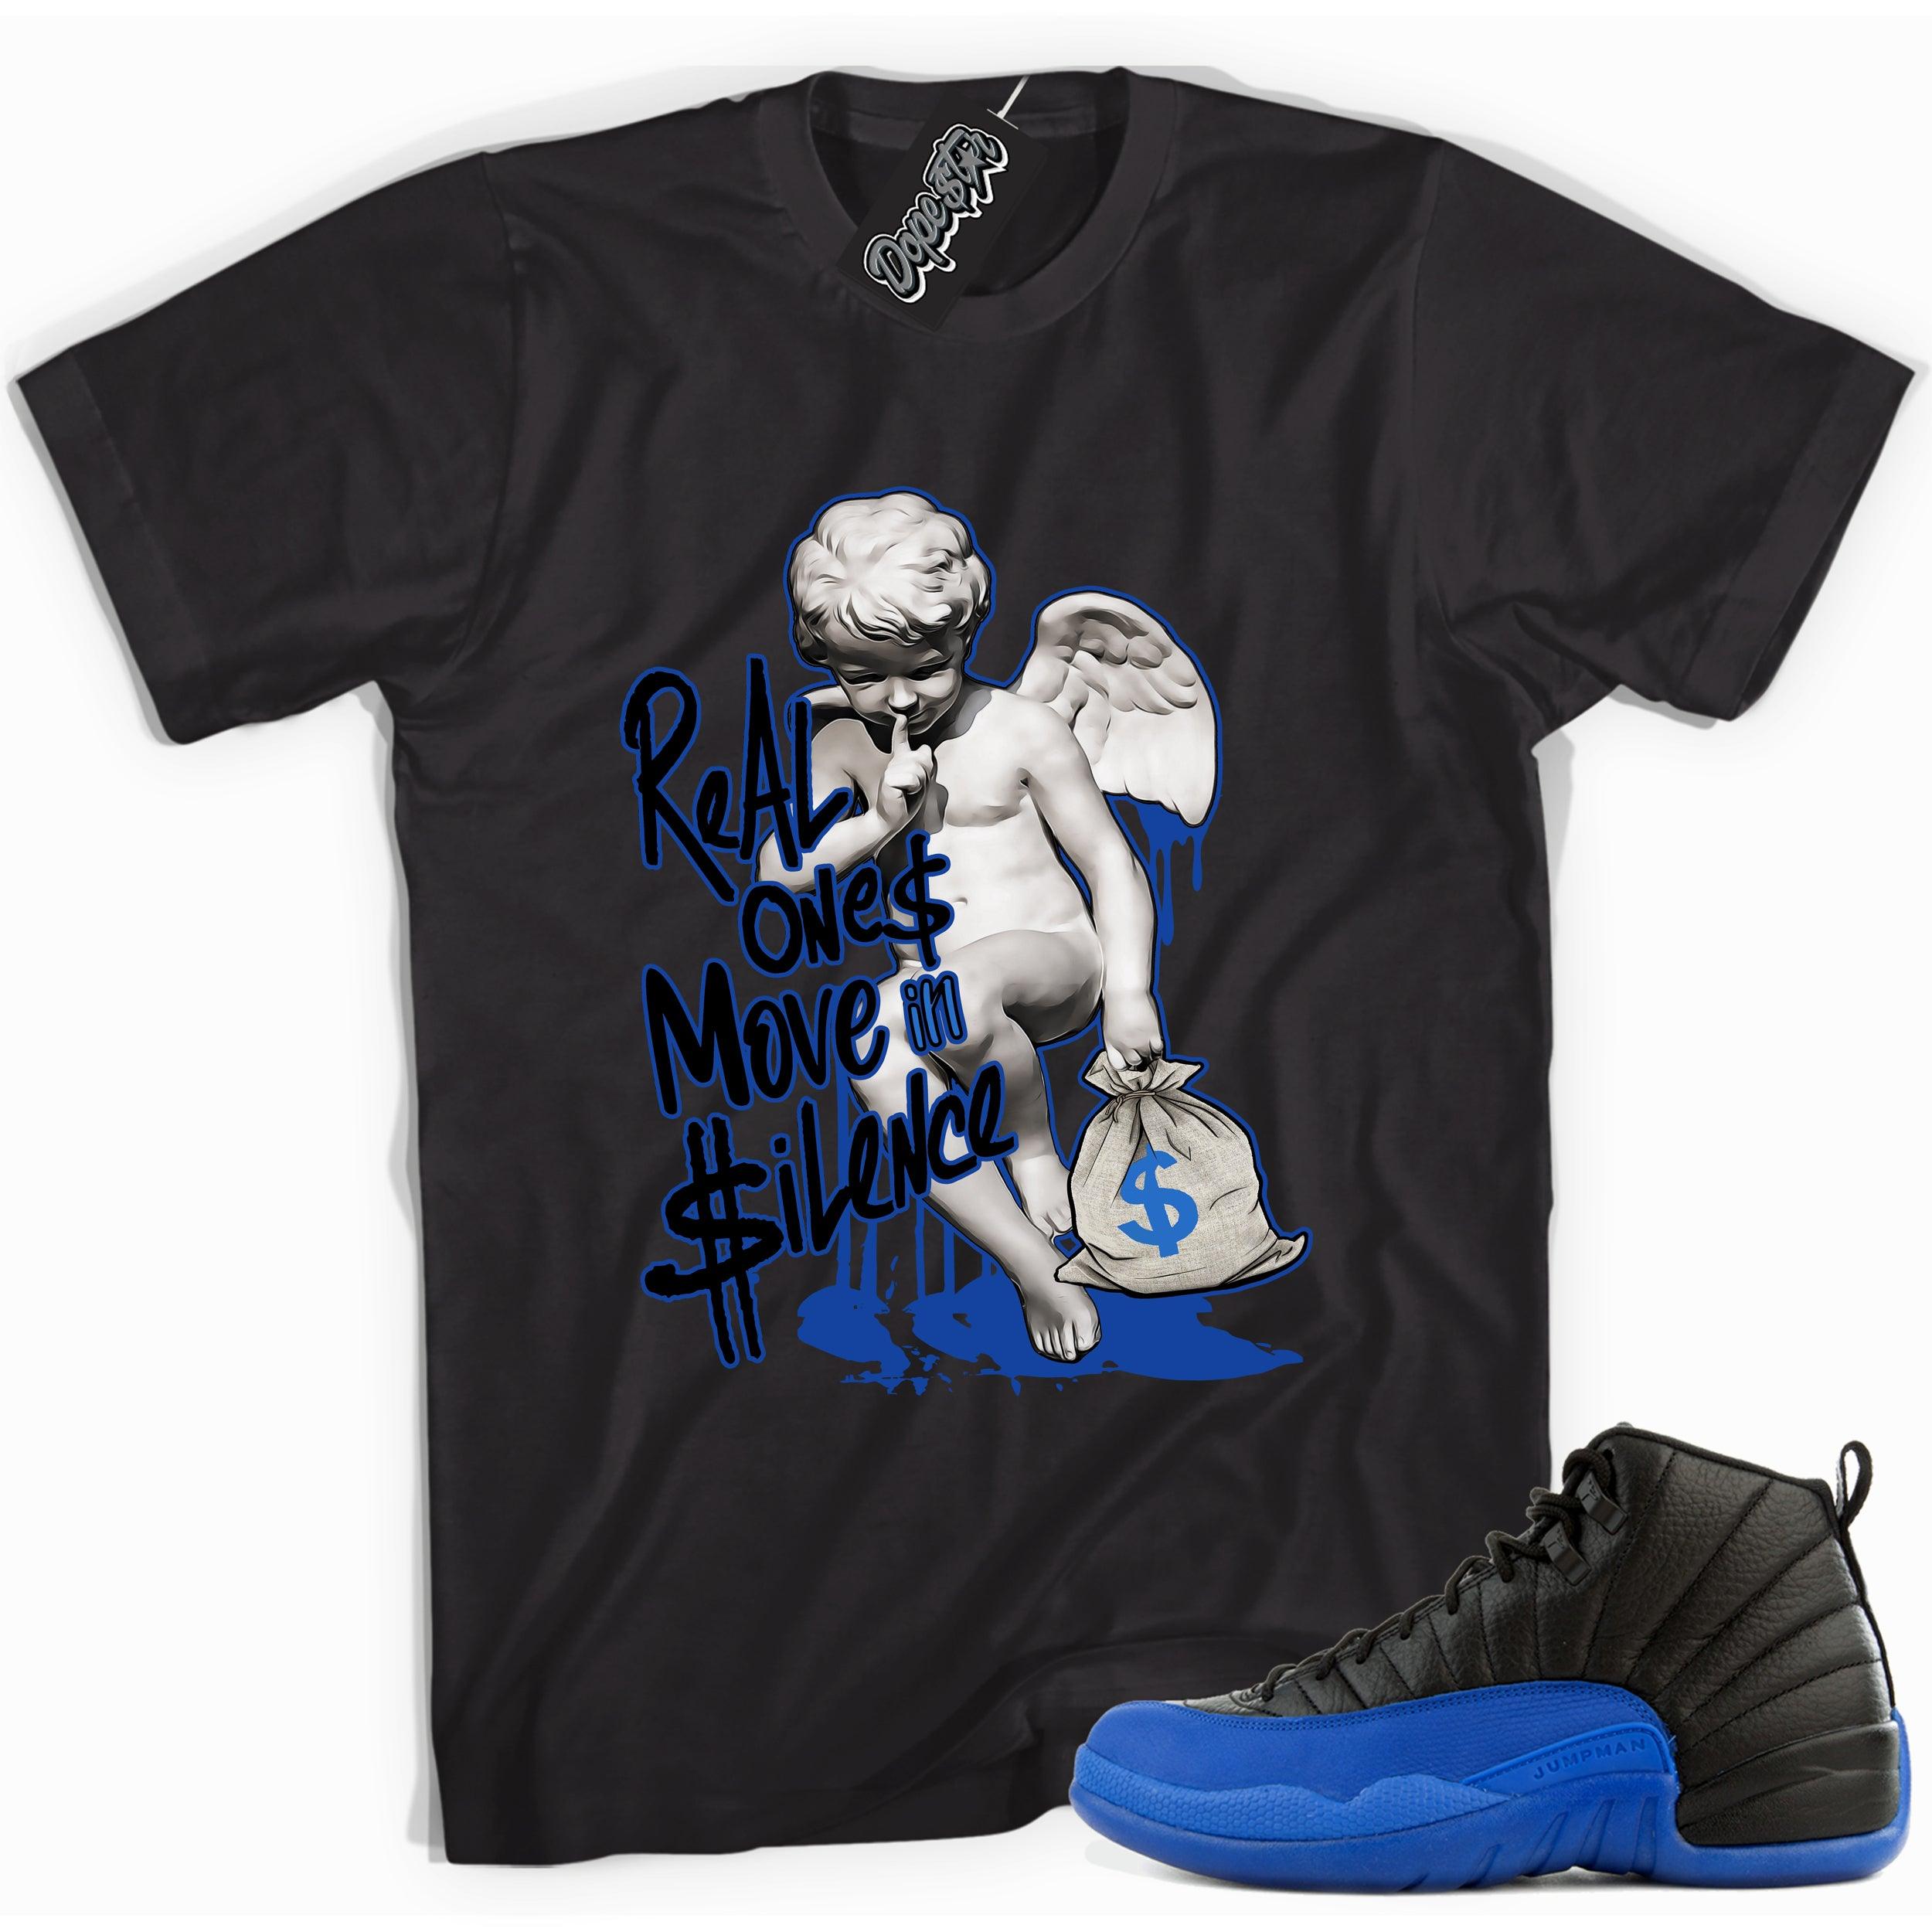 Cool black graphic tee with 'real ones move in silence' print, that perfectly matches  Air Jordan 12 Retro Black Game Royal sneakers.